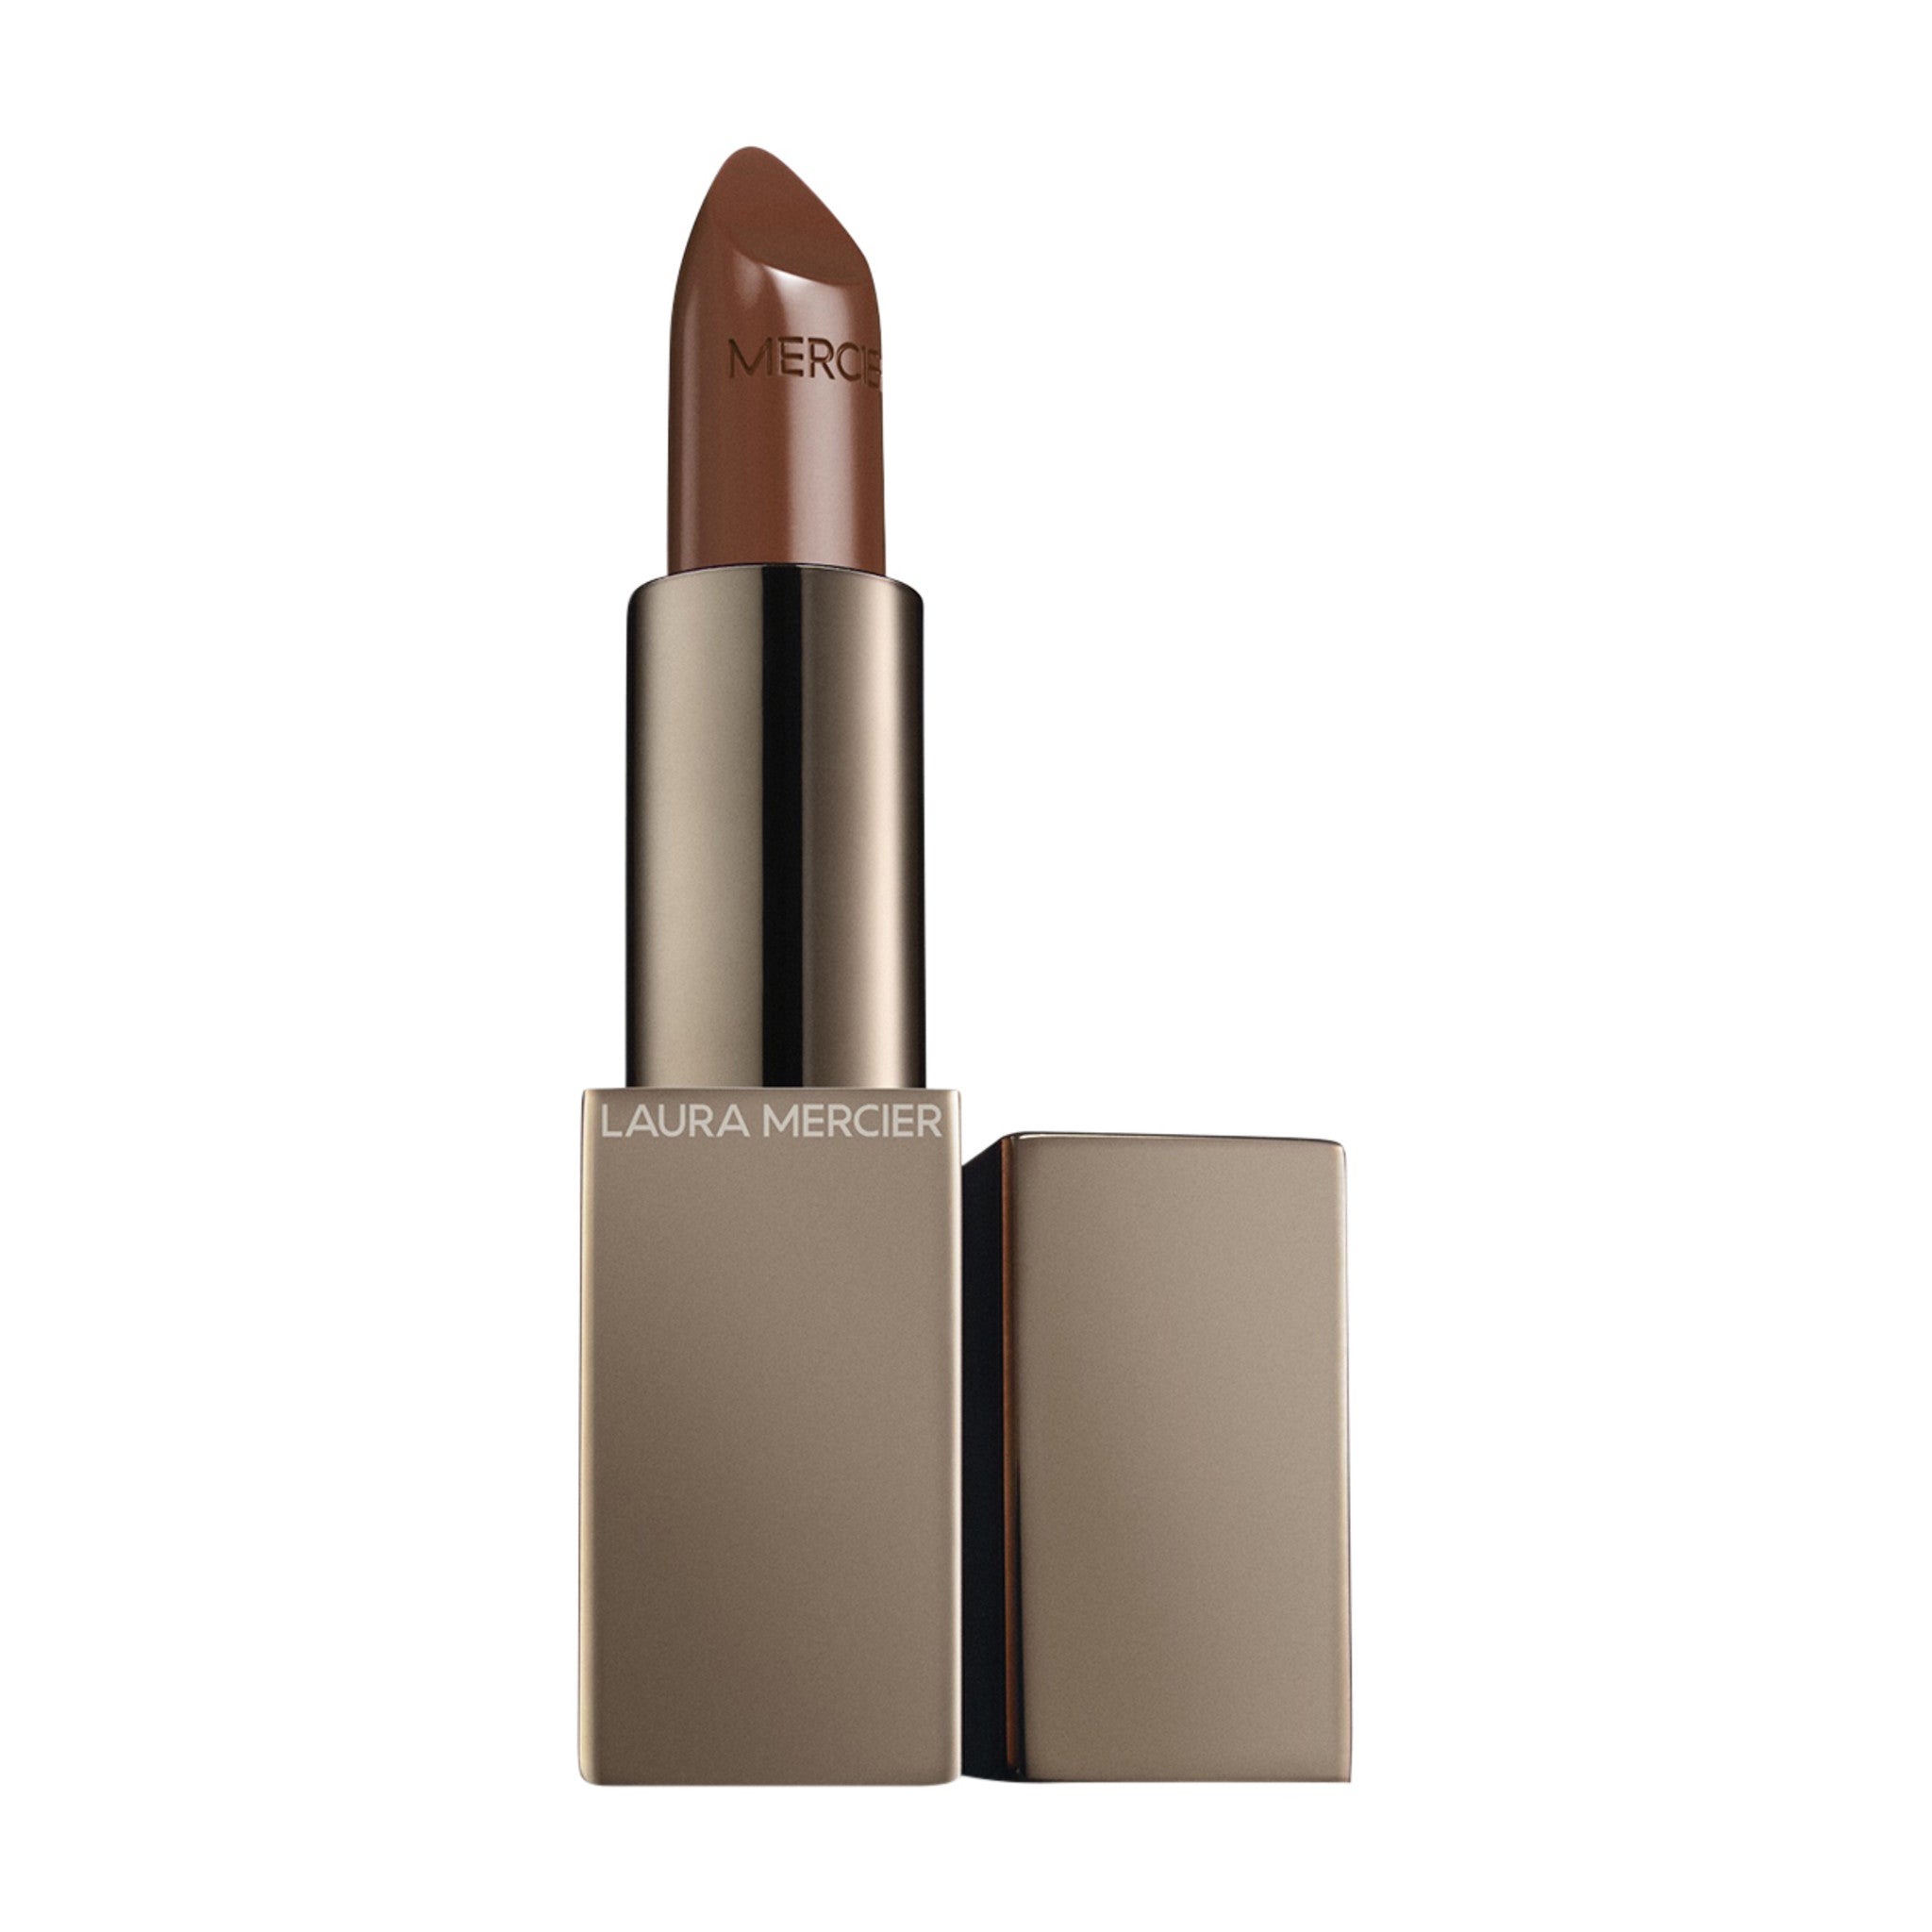 Laura Mercier Rouge Essentiel Silky Crème Lipstick Color/Shade variant: Brun Naturel main image. This product is in the color pink